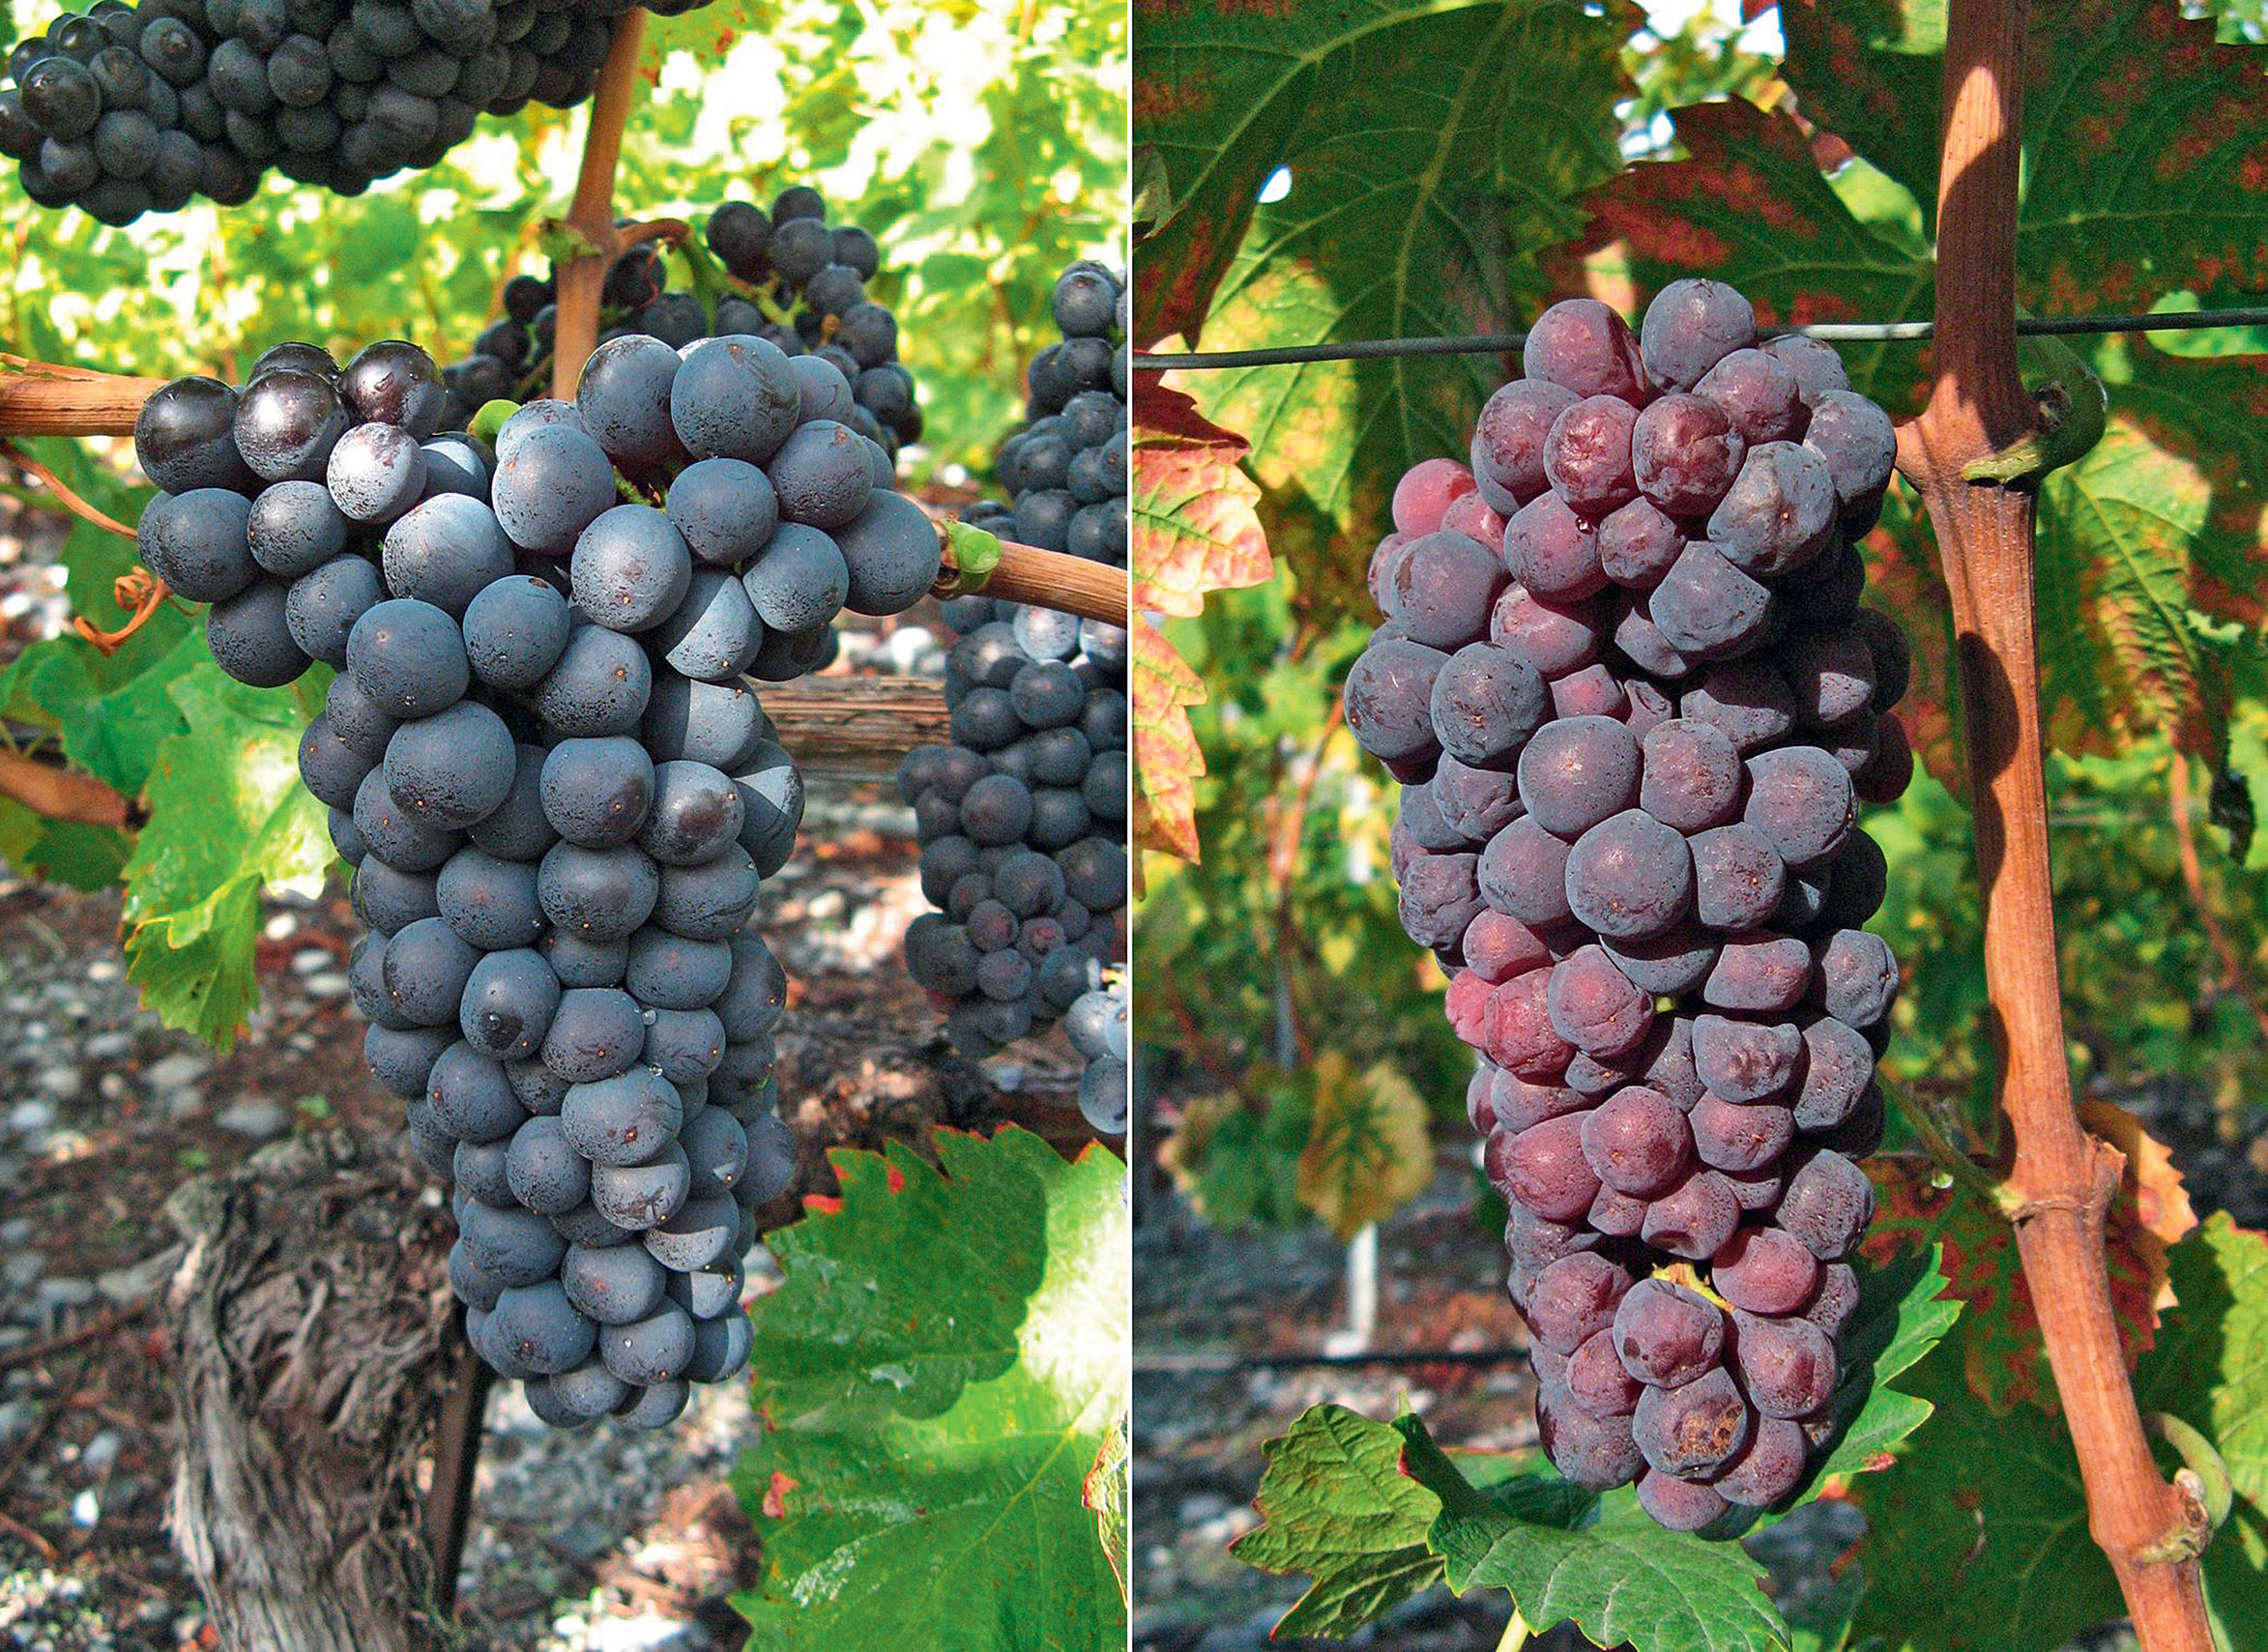 Study of Berry Shrivel in the Humagne Rouge Grape Variety